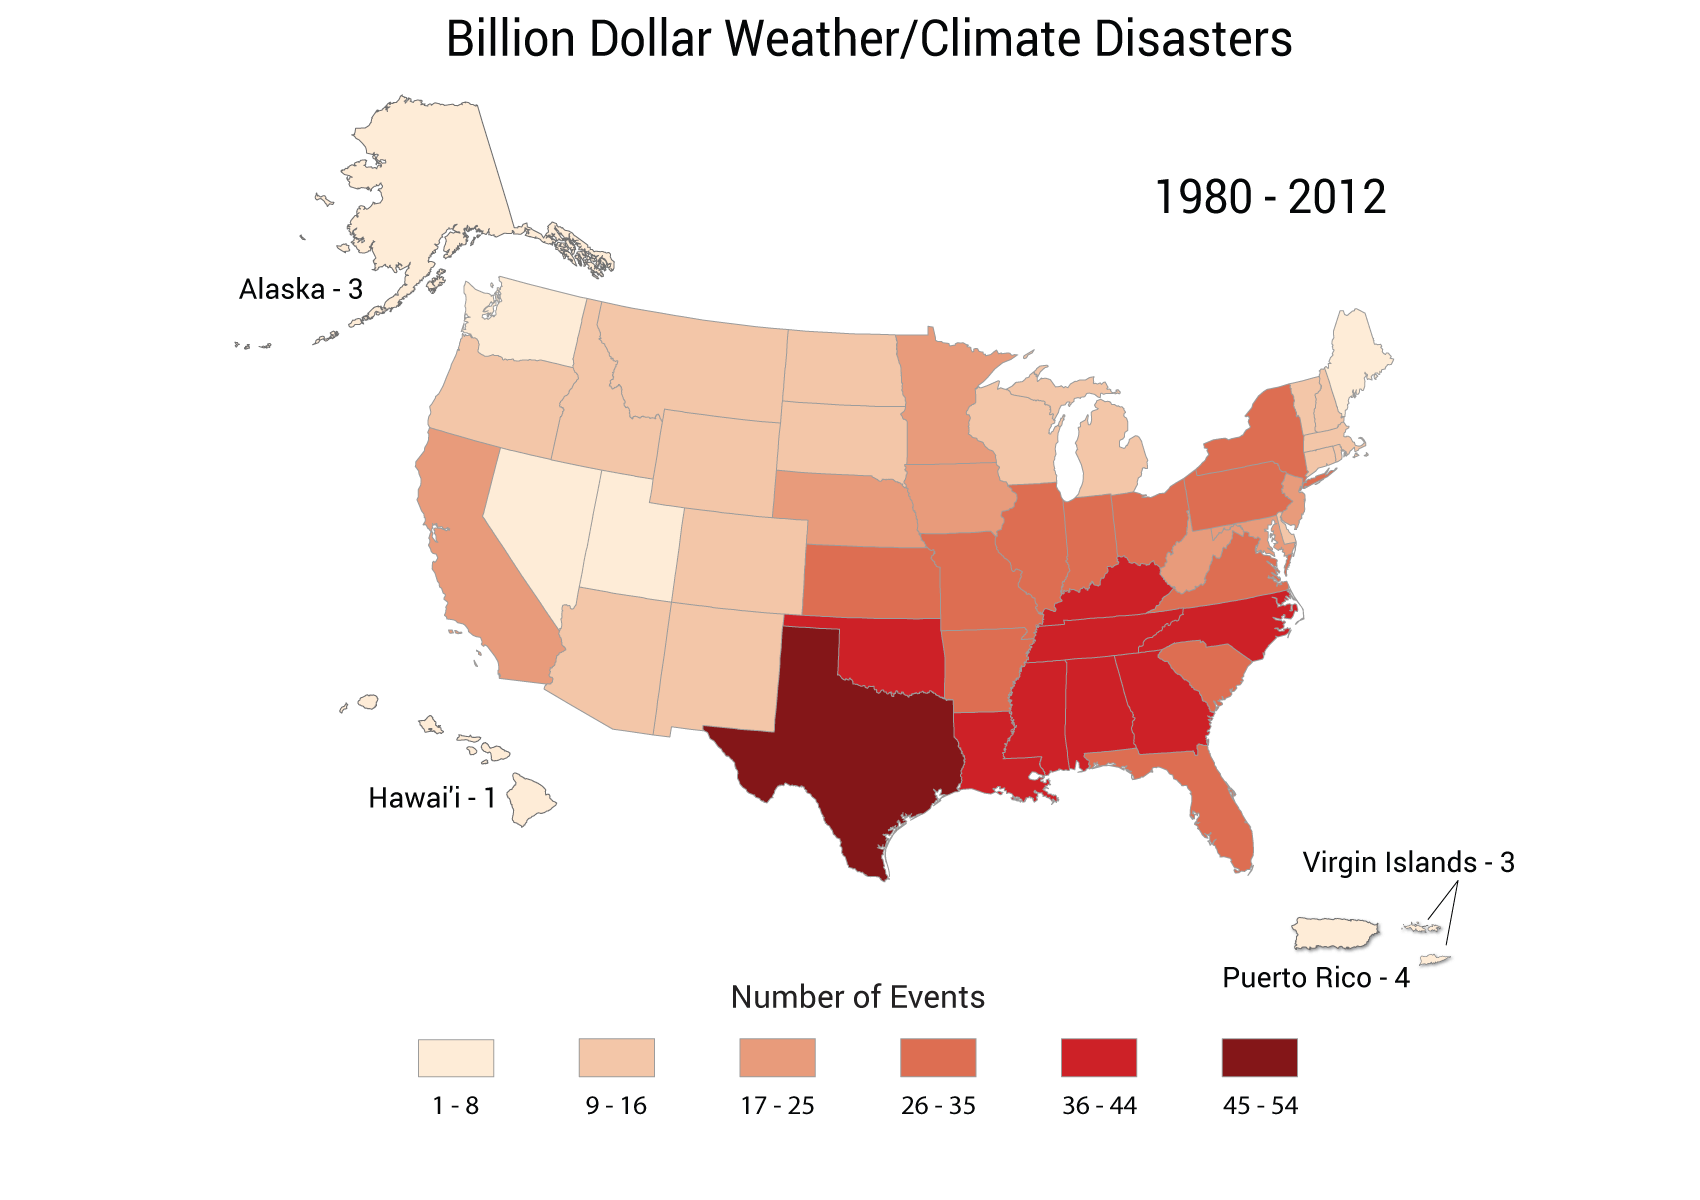 Billion Dollar Weather/Climate Disasters 1980-2012